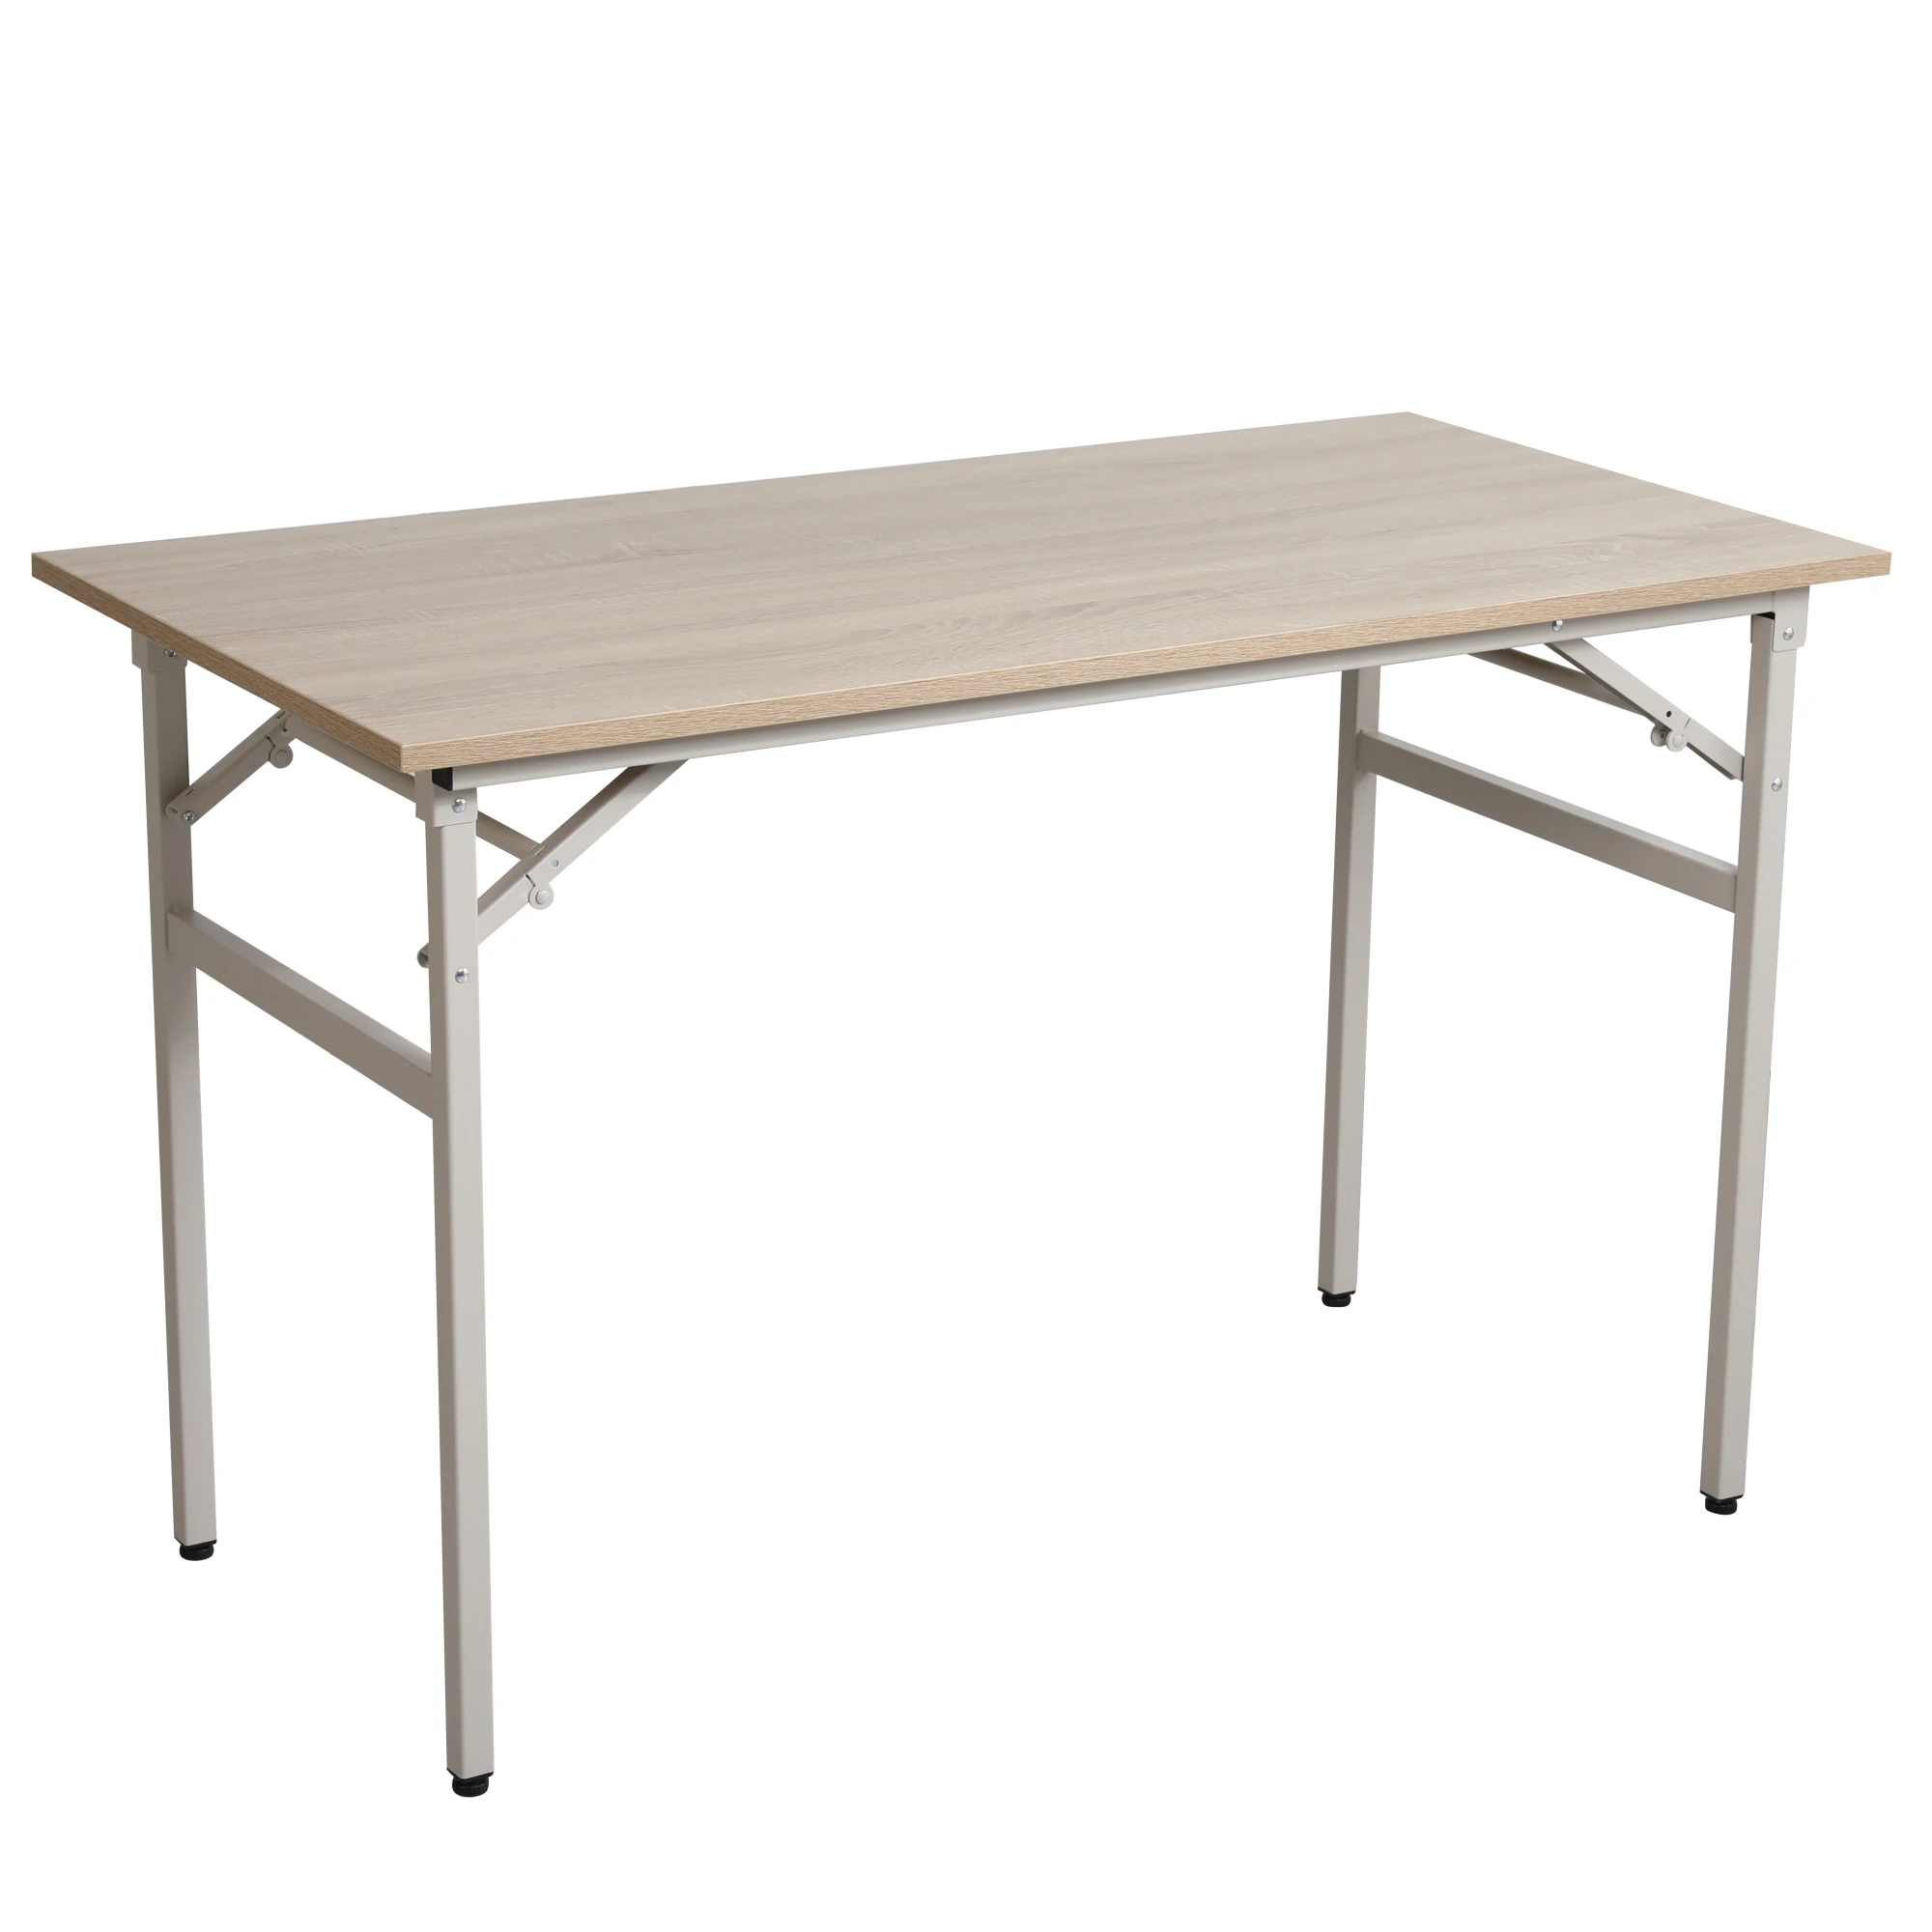 Folding table desk black 47✖24 inches computer Workstation No Install creamy white 2 foot round granite white plastic folding table 24 00 x 24 00 x 29 38 inches